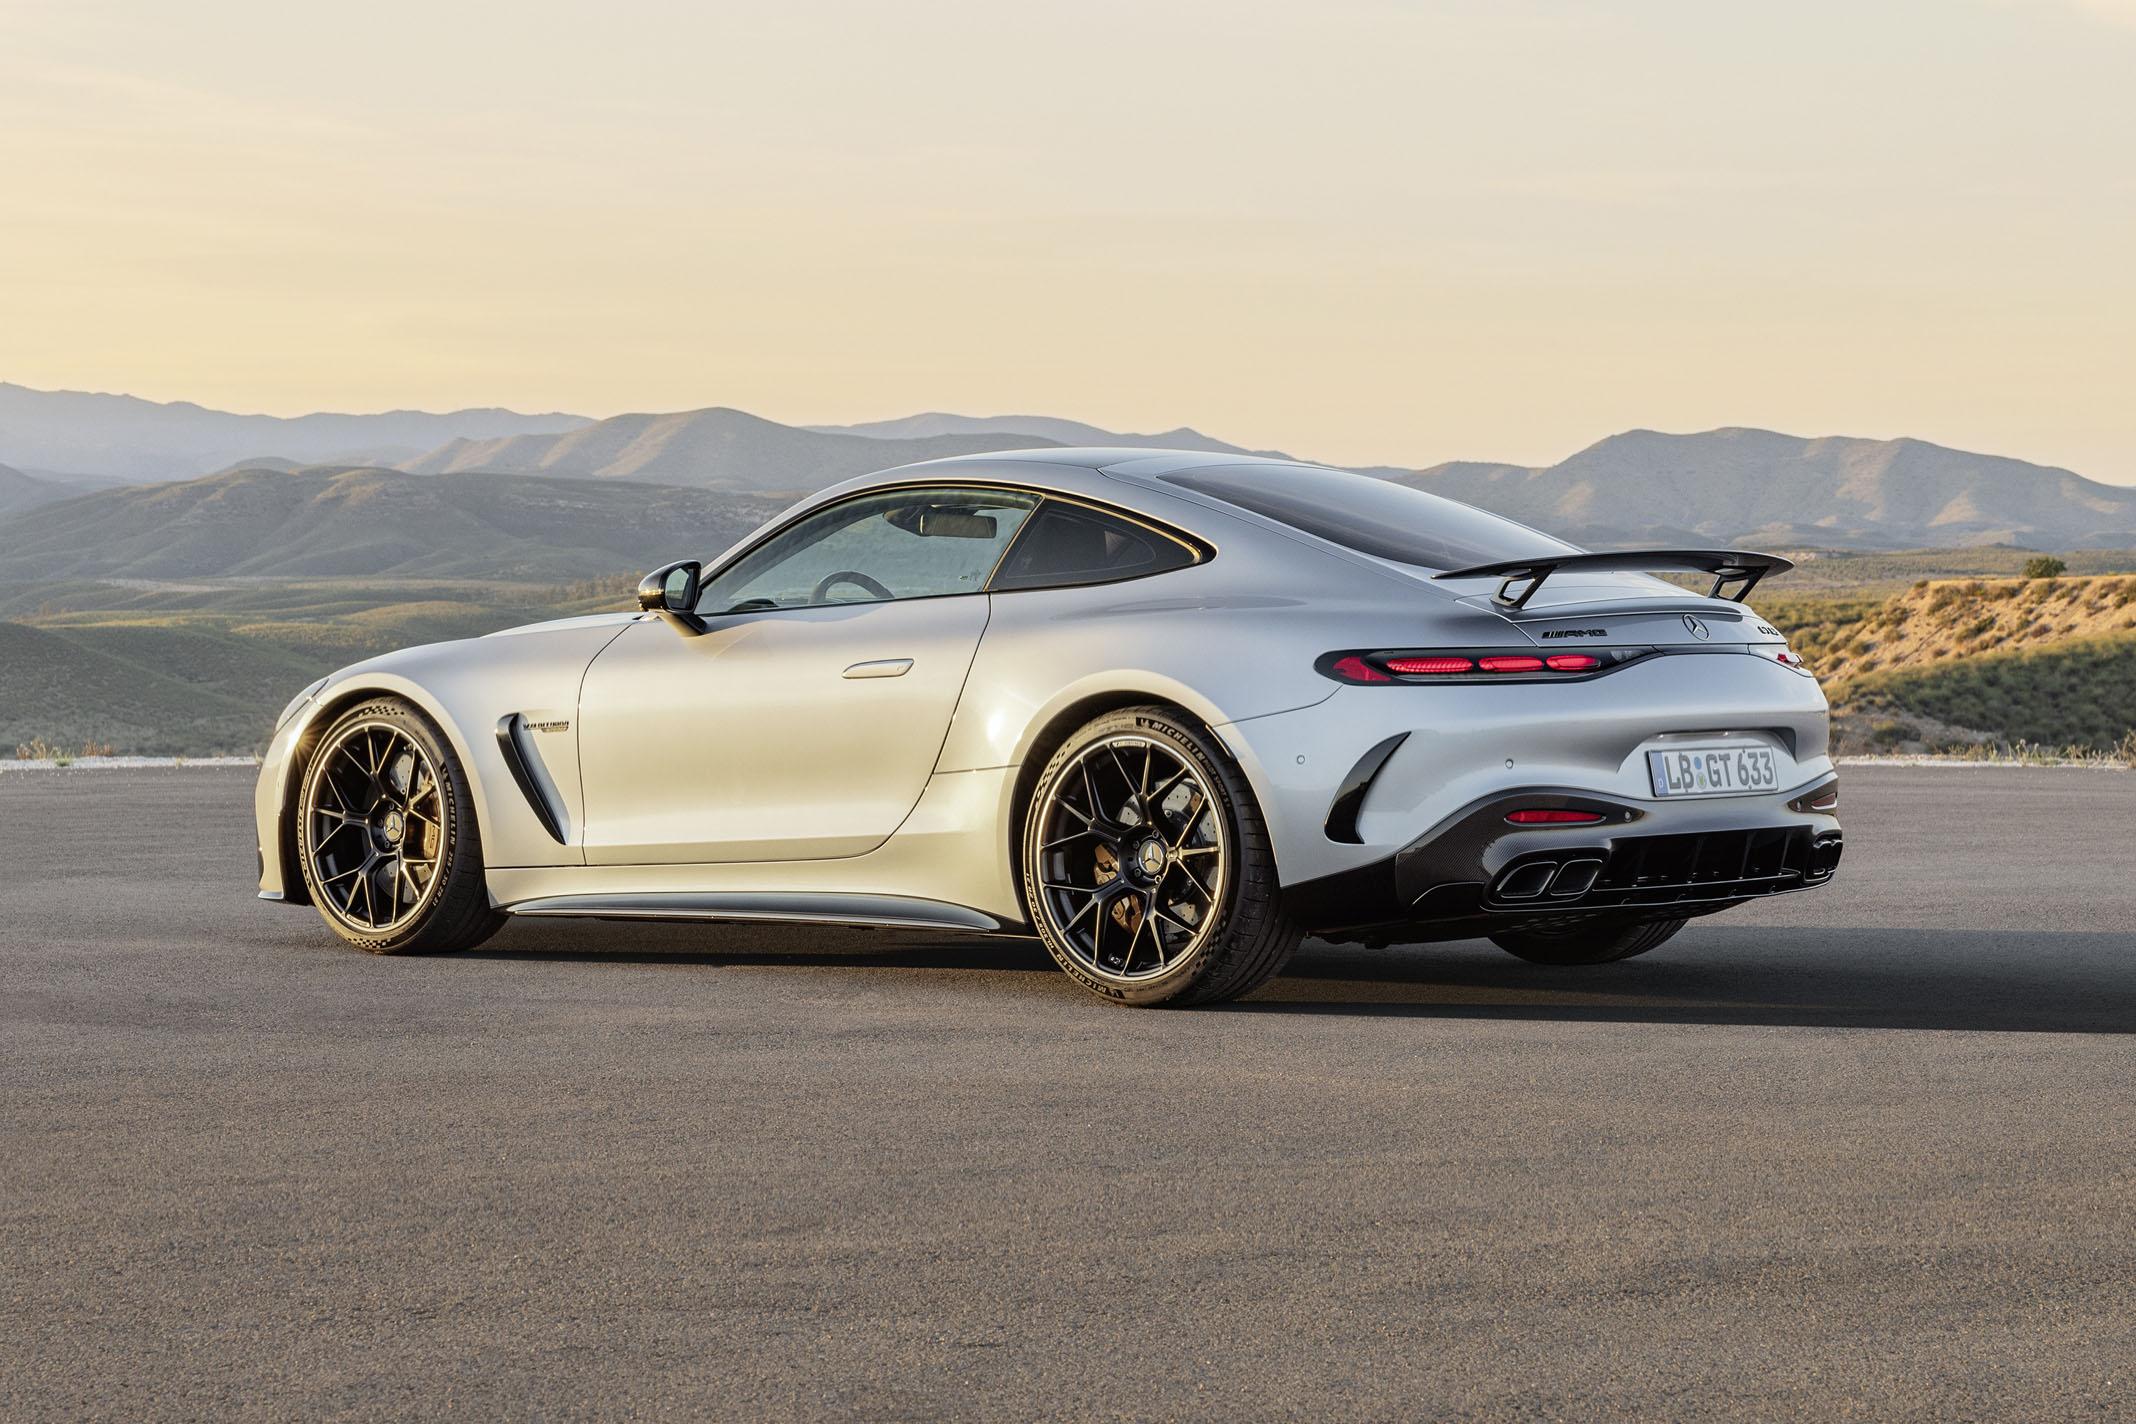 Mercedes Amg Gt Coupe Unveiled With Four Seats Webtimes